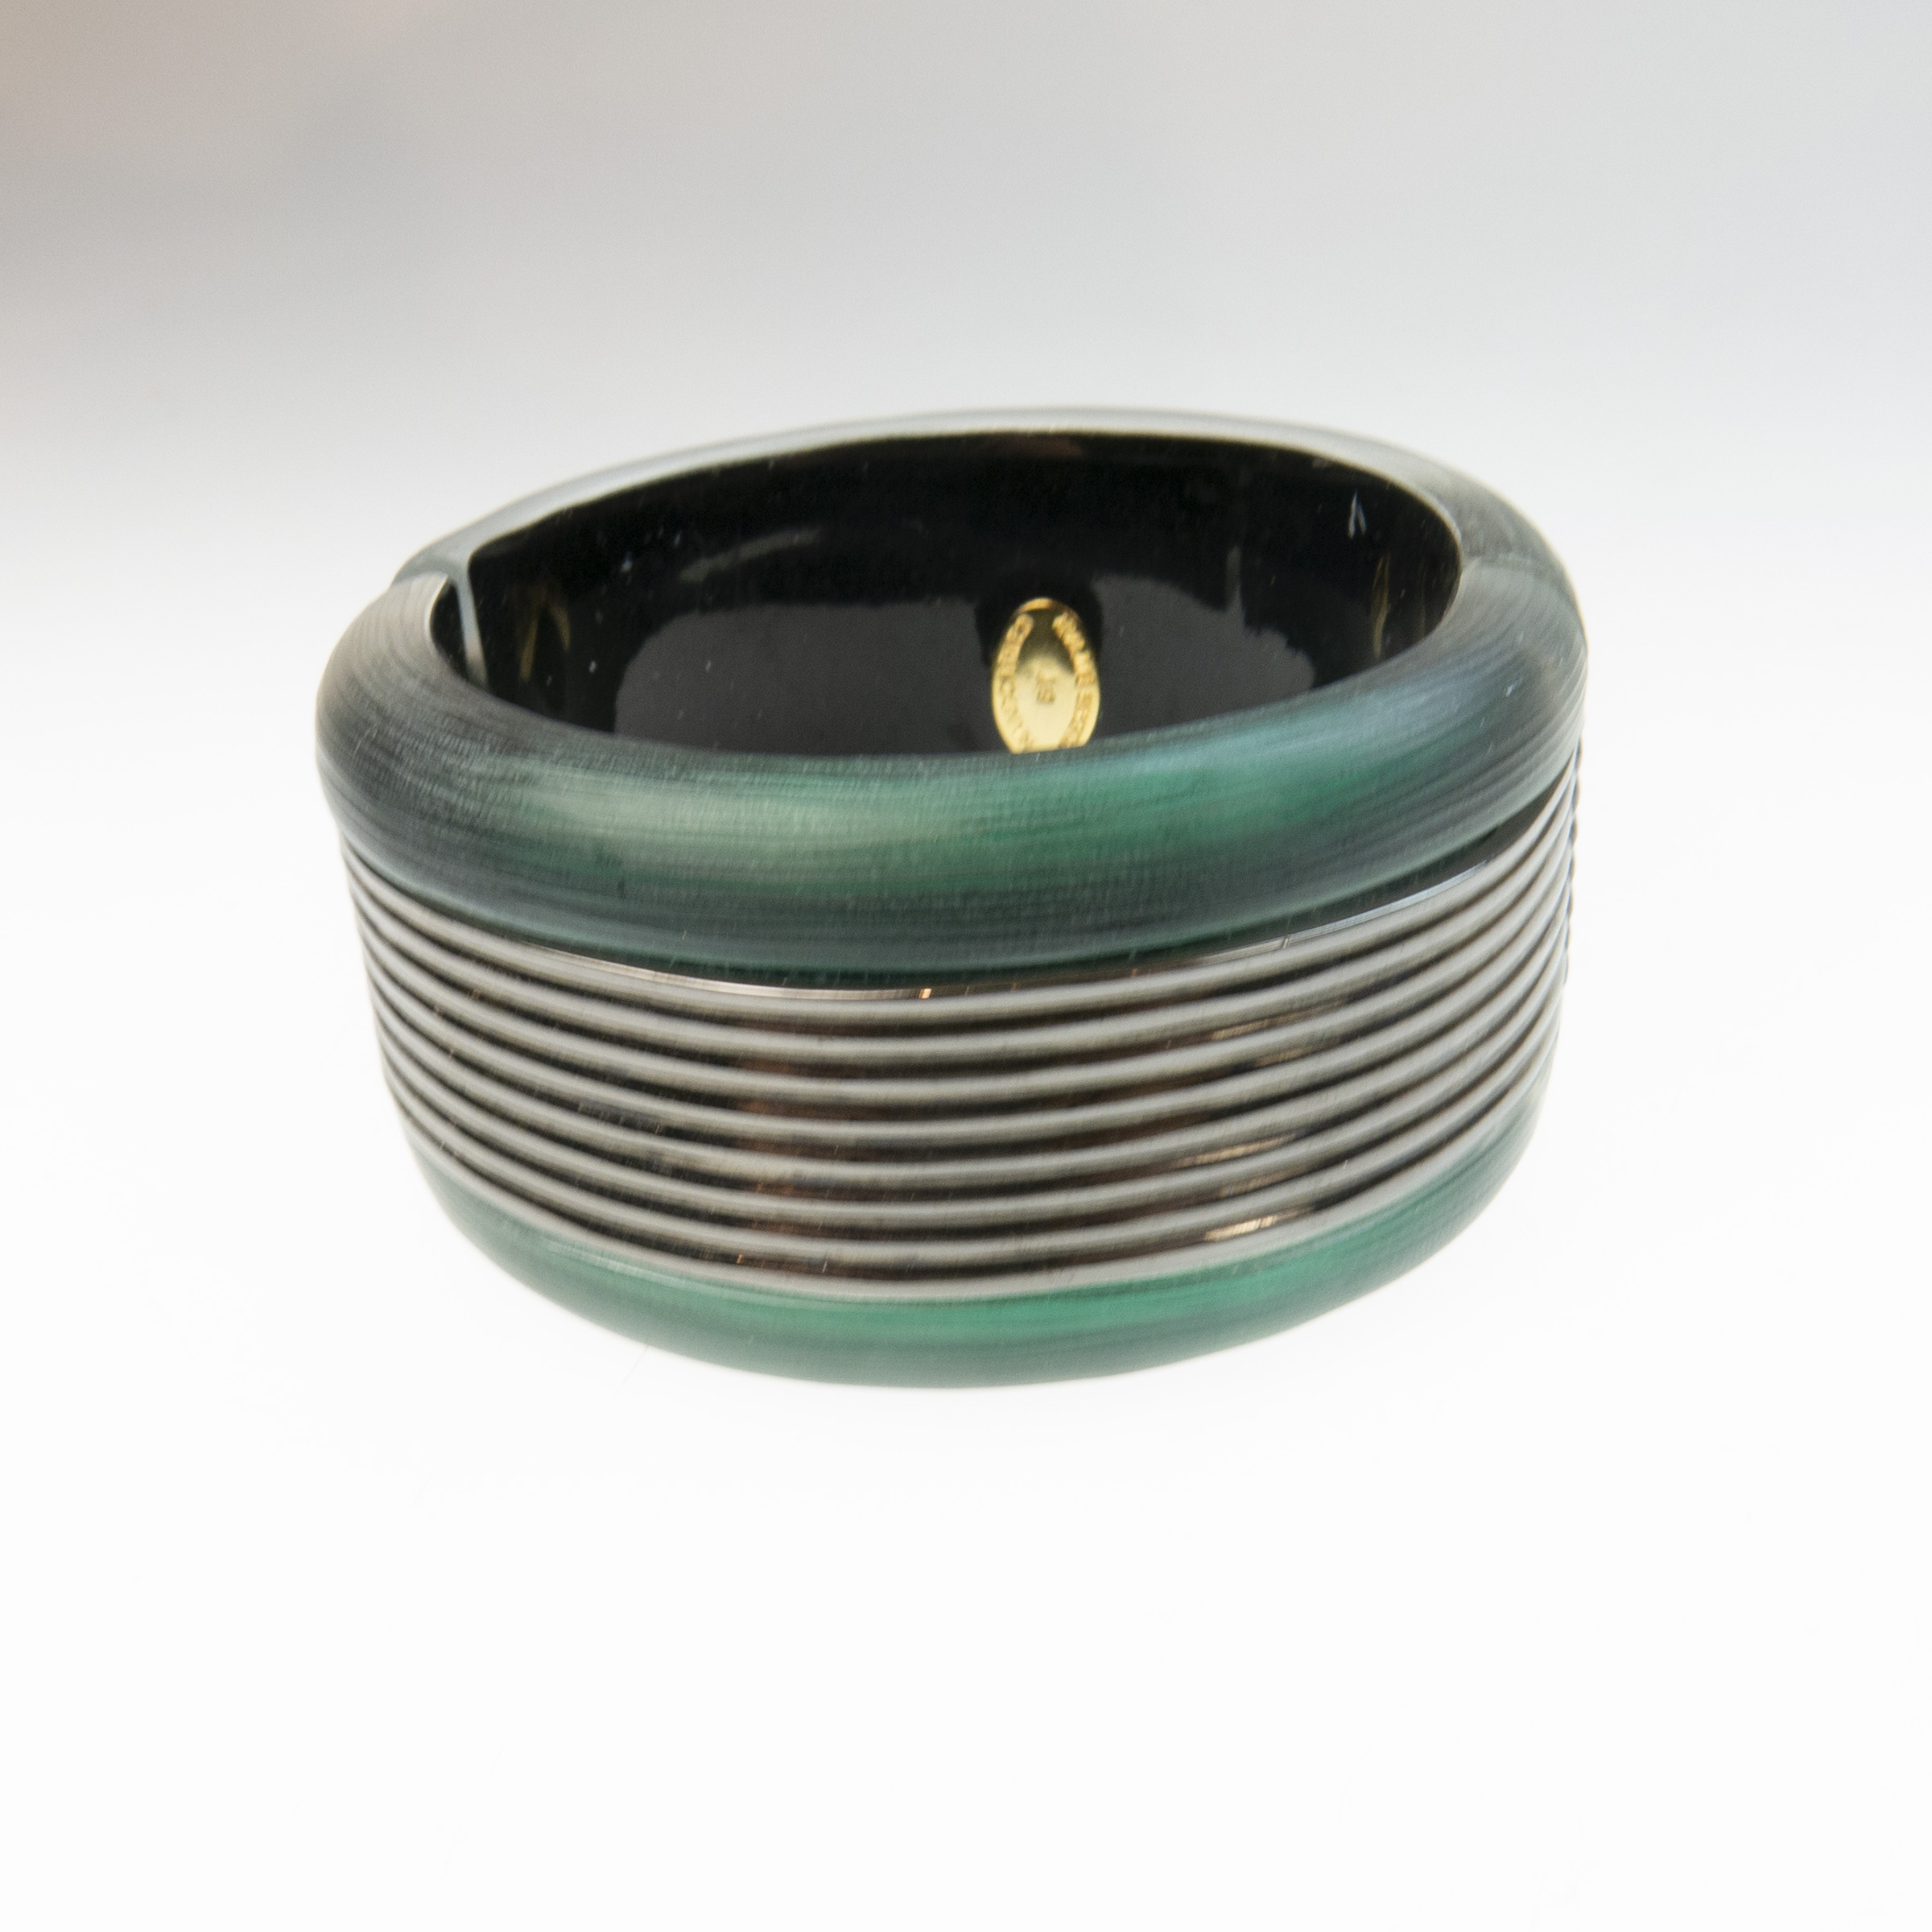 Alexis Bittar Carved Green Lucite and Black Tone Metal Spring Hinged Bangle